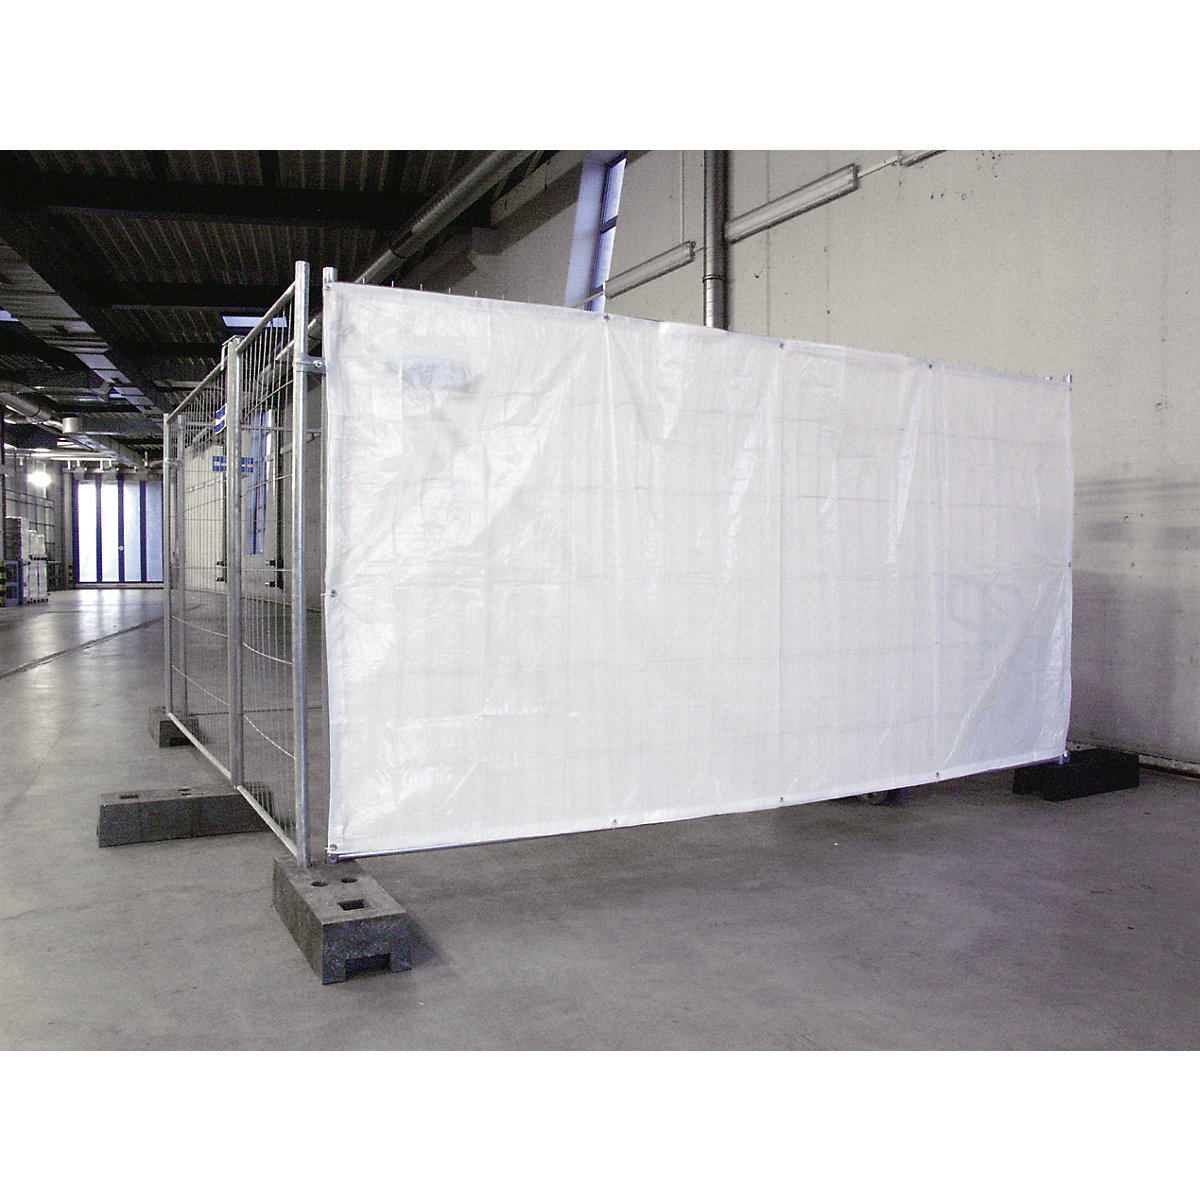 Opaque sheet for mobile security fencing - Schake